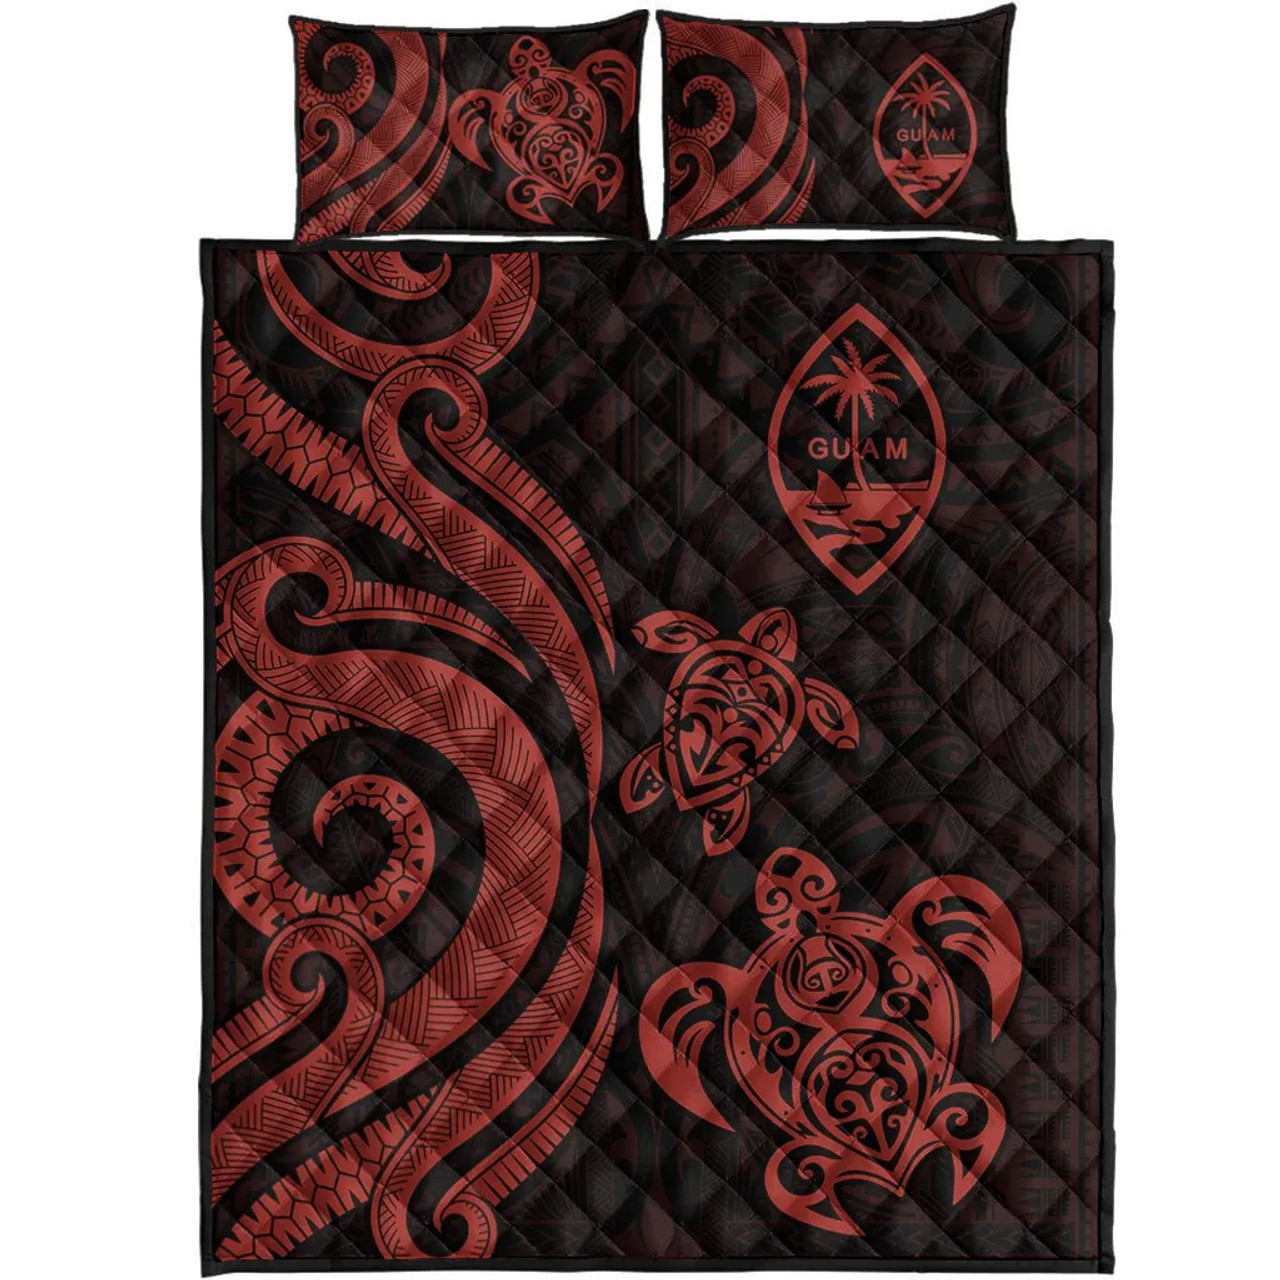 Guam Quilt Bed Set - Red Tentacle Turtle